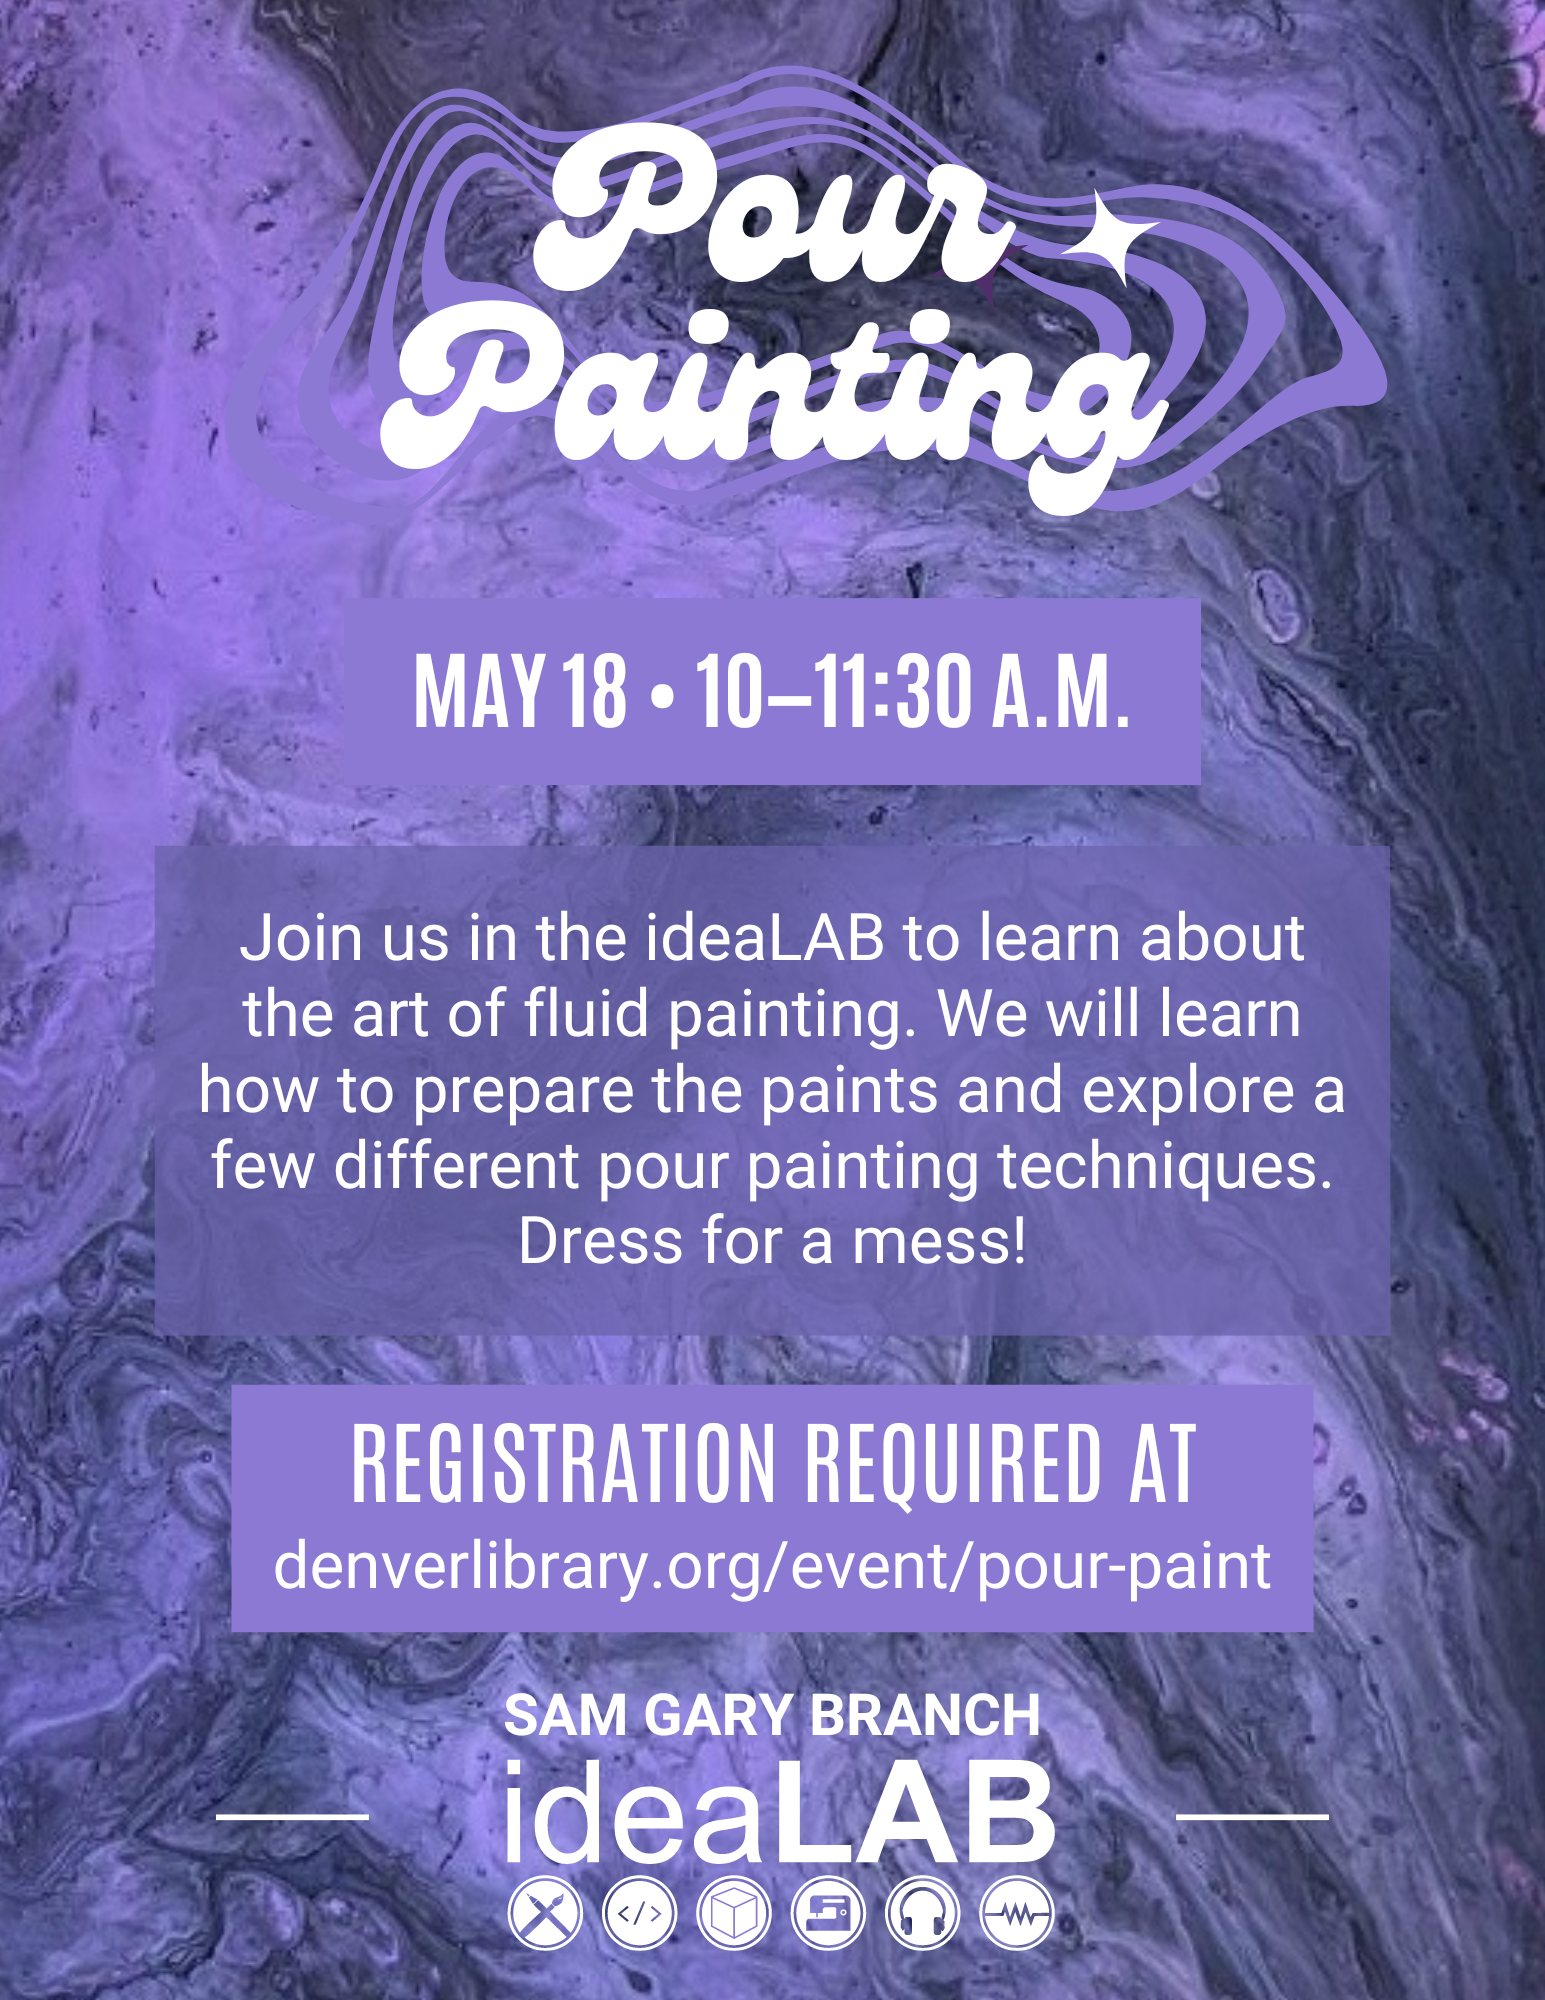 A flyer for the pour painting event, featuring a pour painting background and the ideaLAB logo.